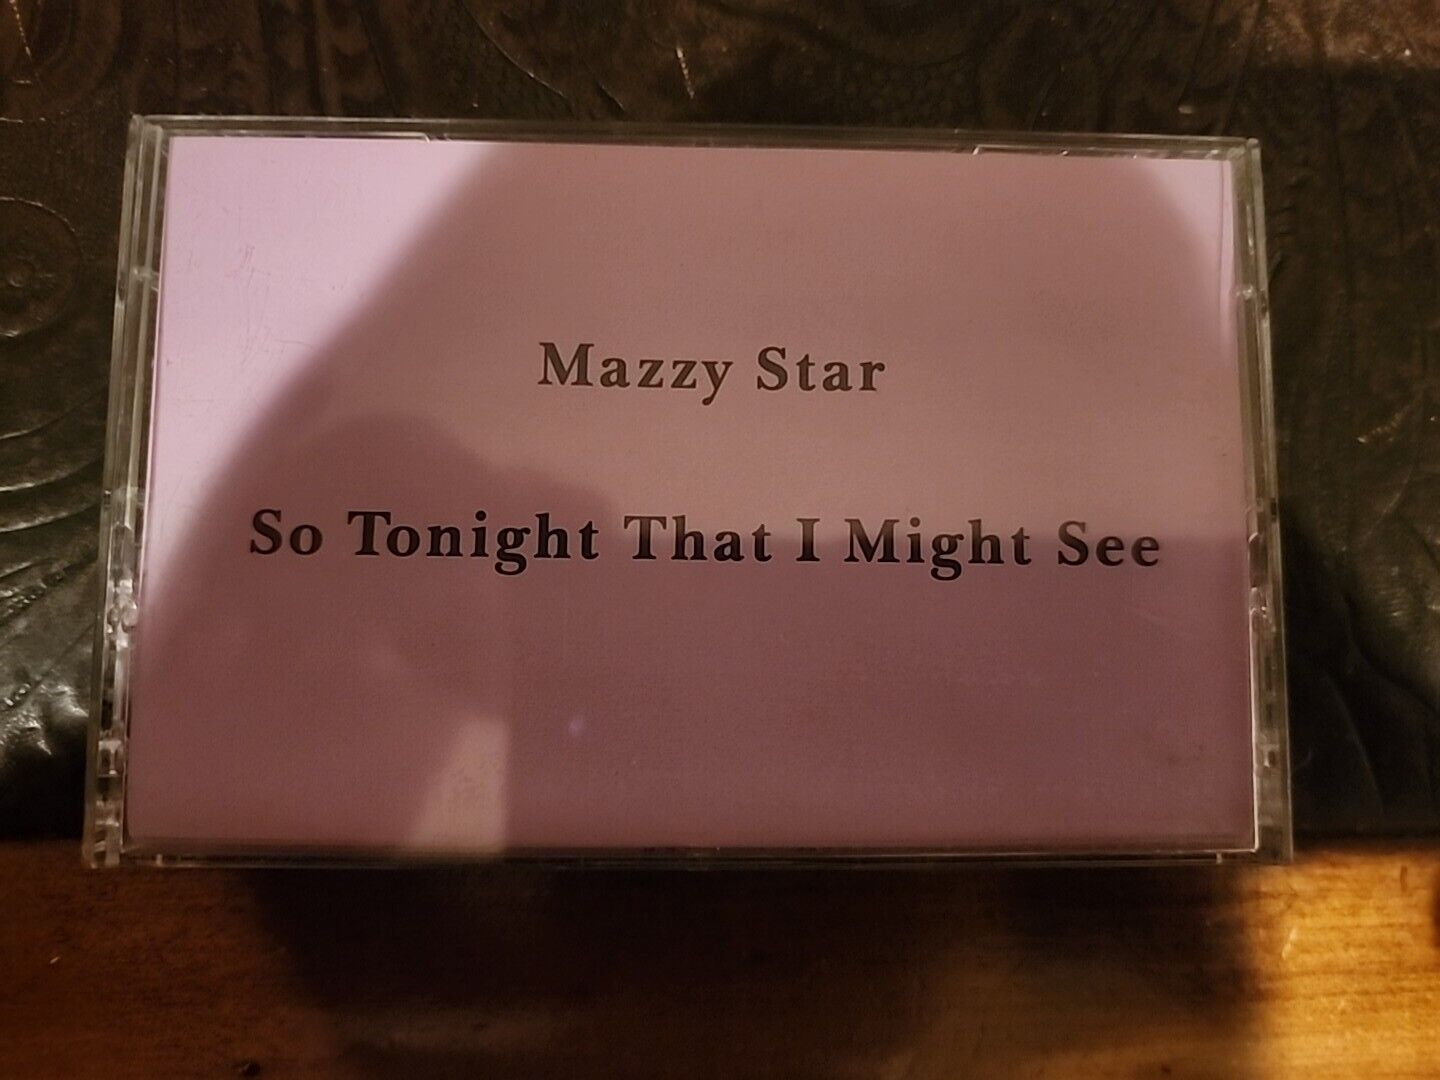 So Tonight That I Might See by Mazzy Star Cassette 1993 Capitol Rare Promo